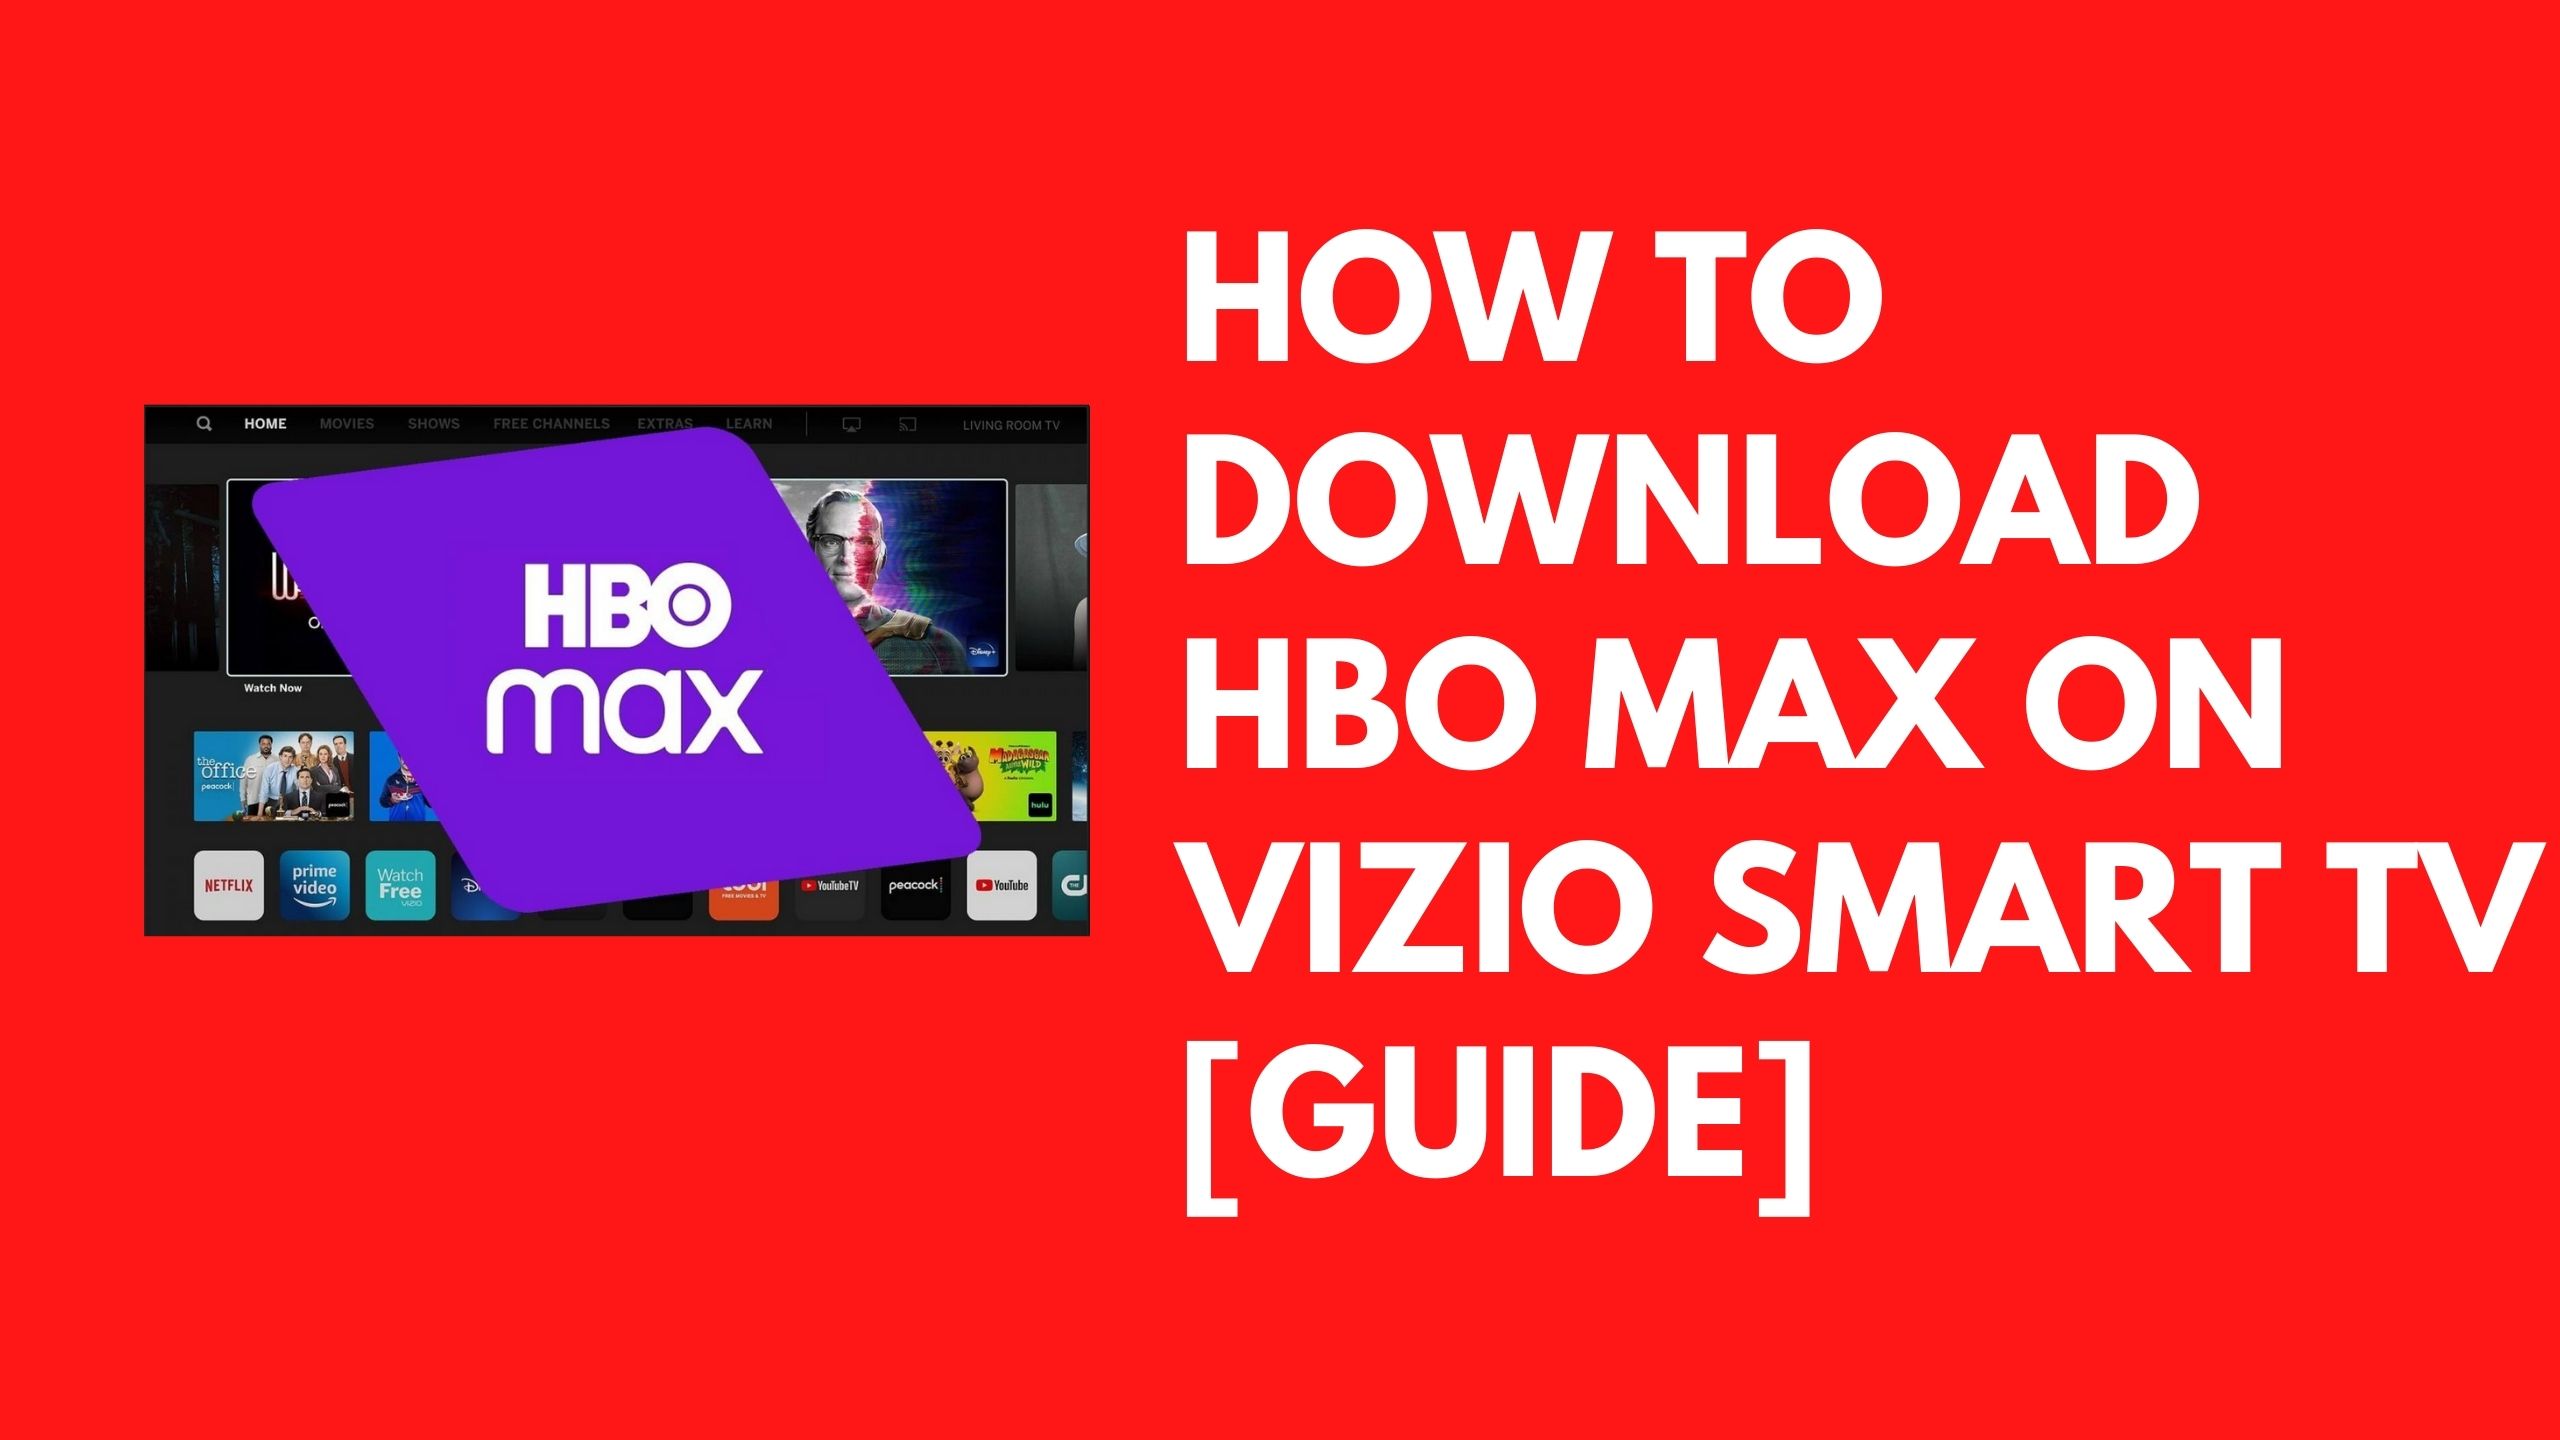 How to Download HBO Max on Vizio Smart TV [Guide]